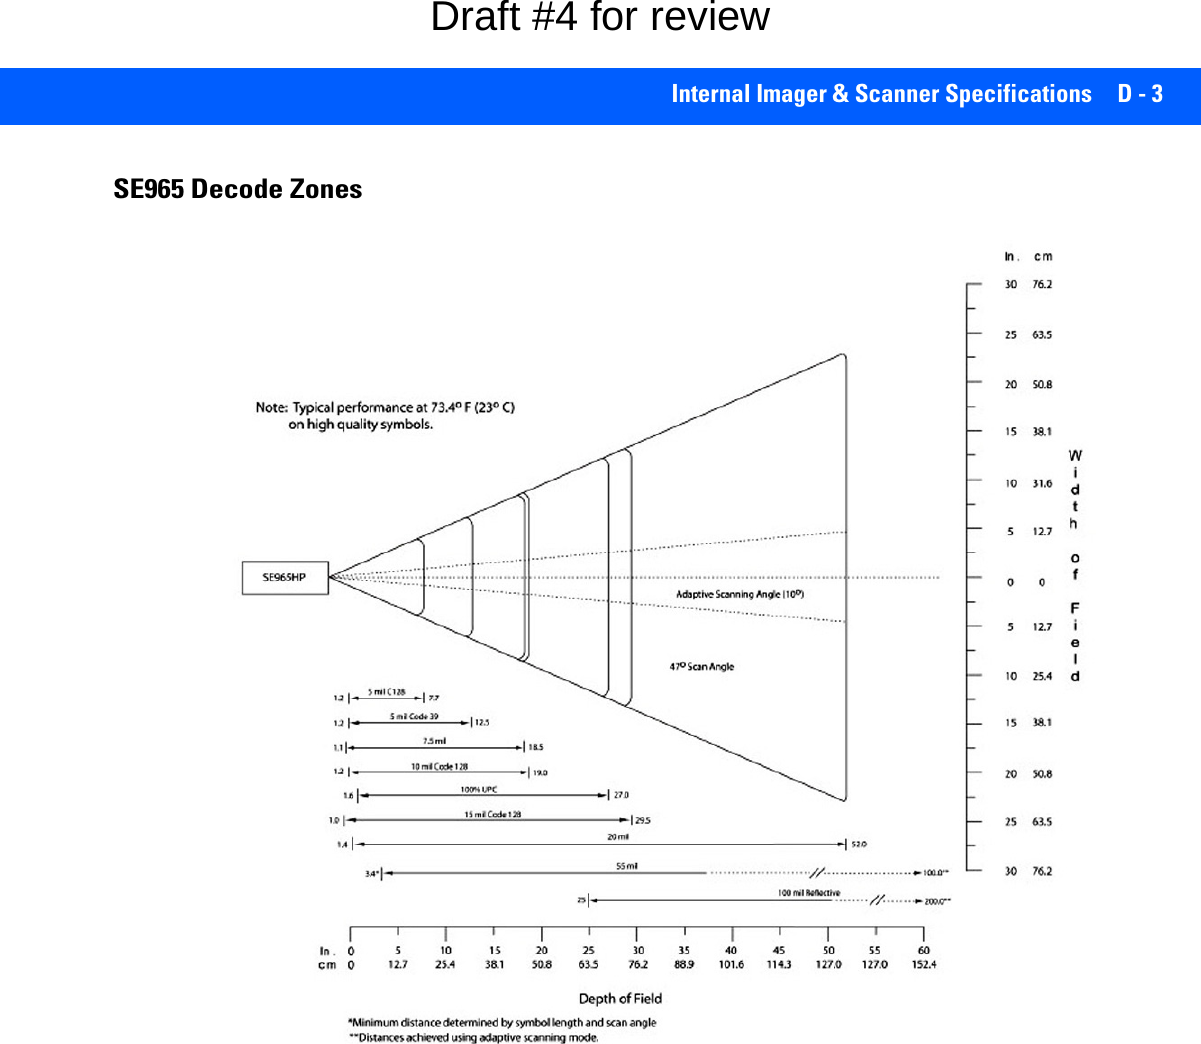 Internal Imager &amp; Scanner Specifications D - 3SE965 Decode ZonesDraft #4 for review